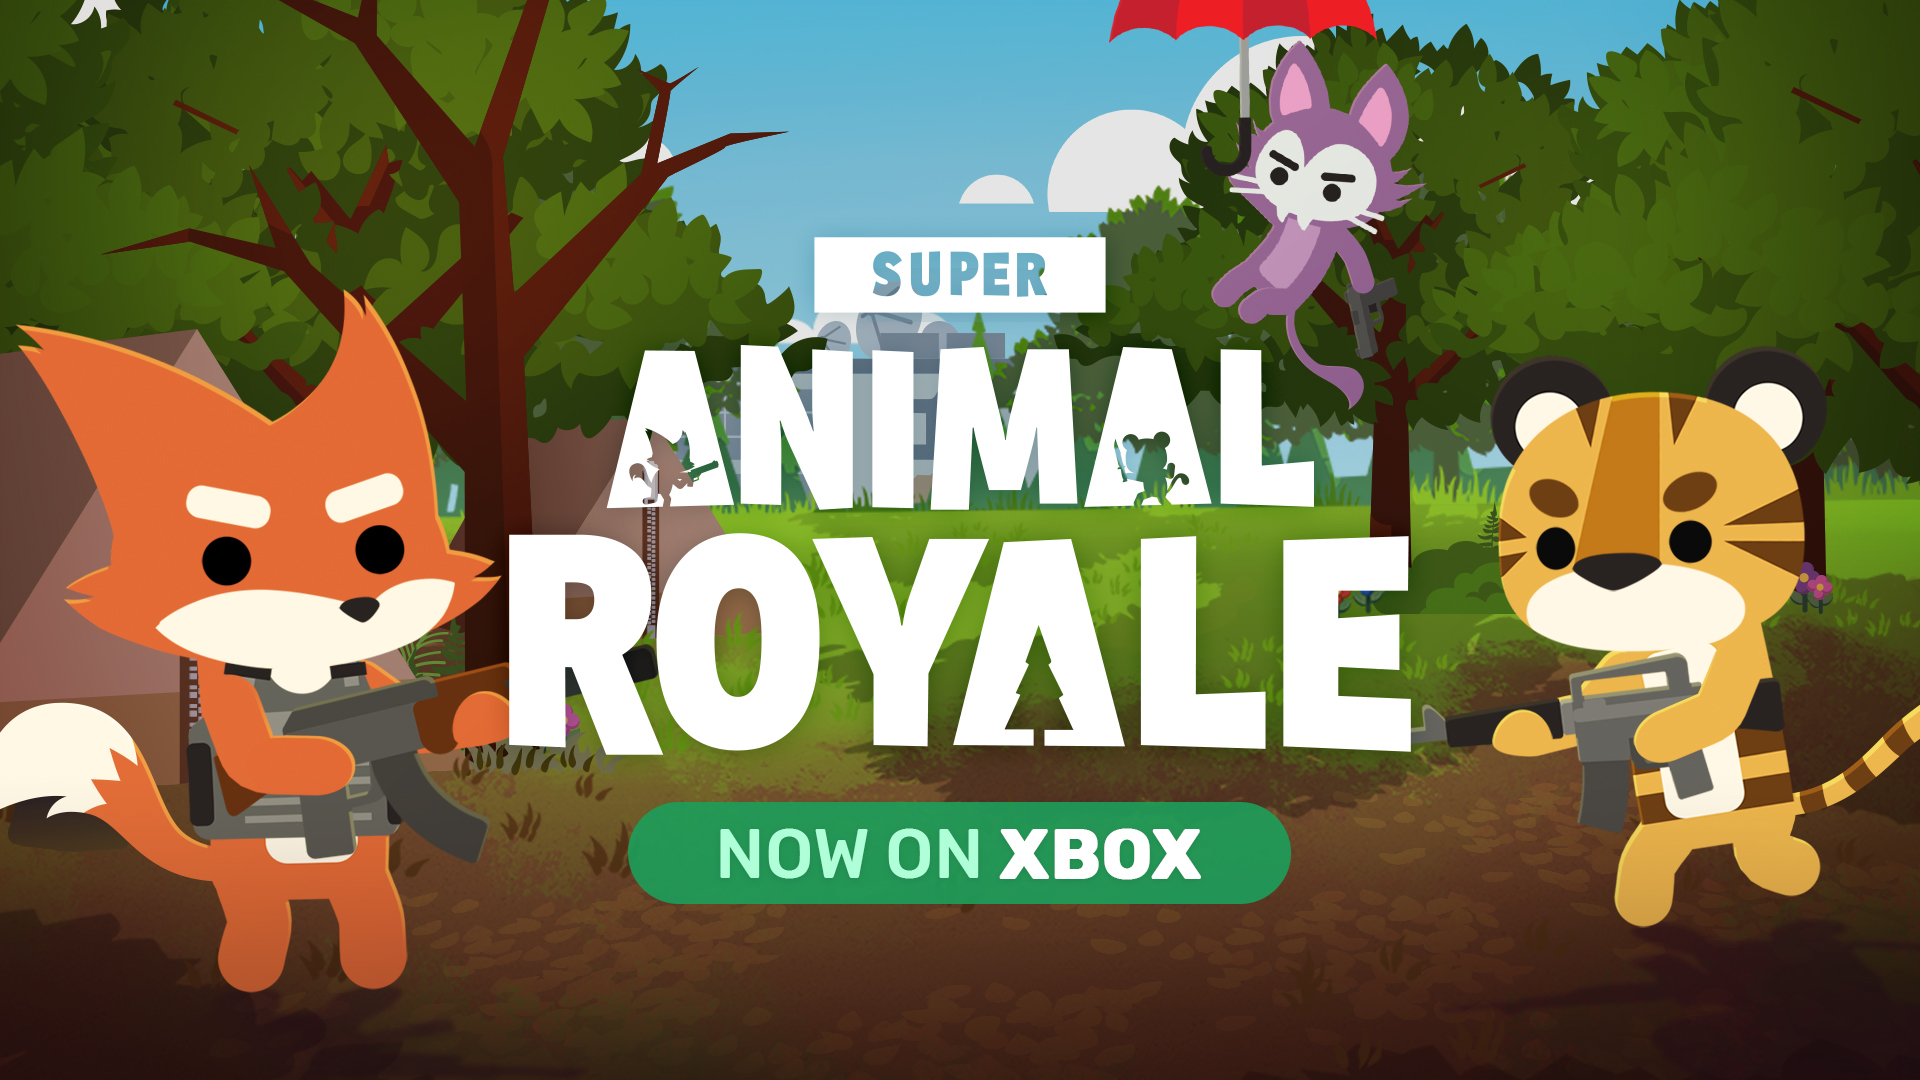 Play Super Animal Royale for Free on Xbox Game Preview Now!